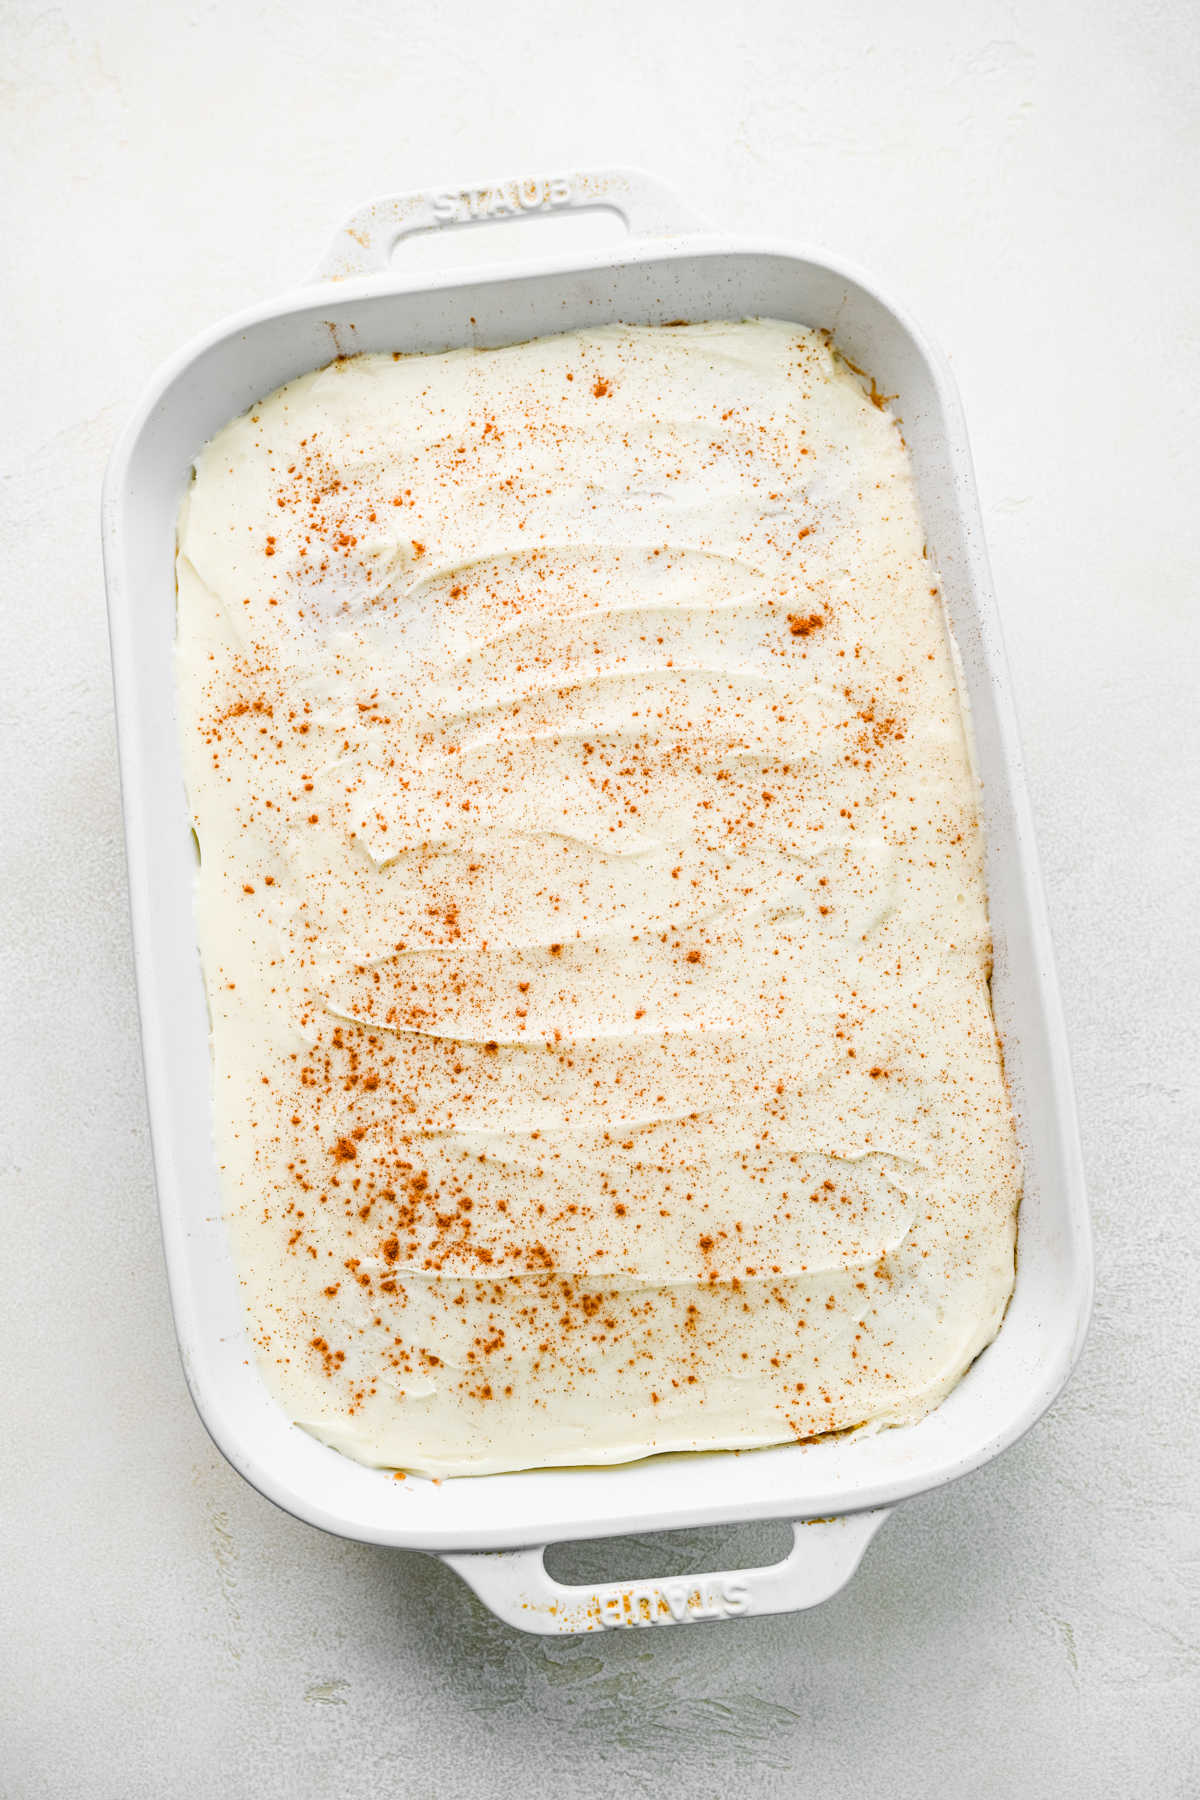 Frosted cinnamon roll poke cake in a white baking pan with cinnamon sprinkled on top.